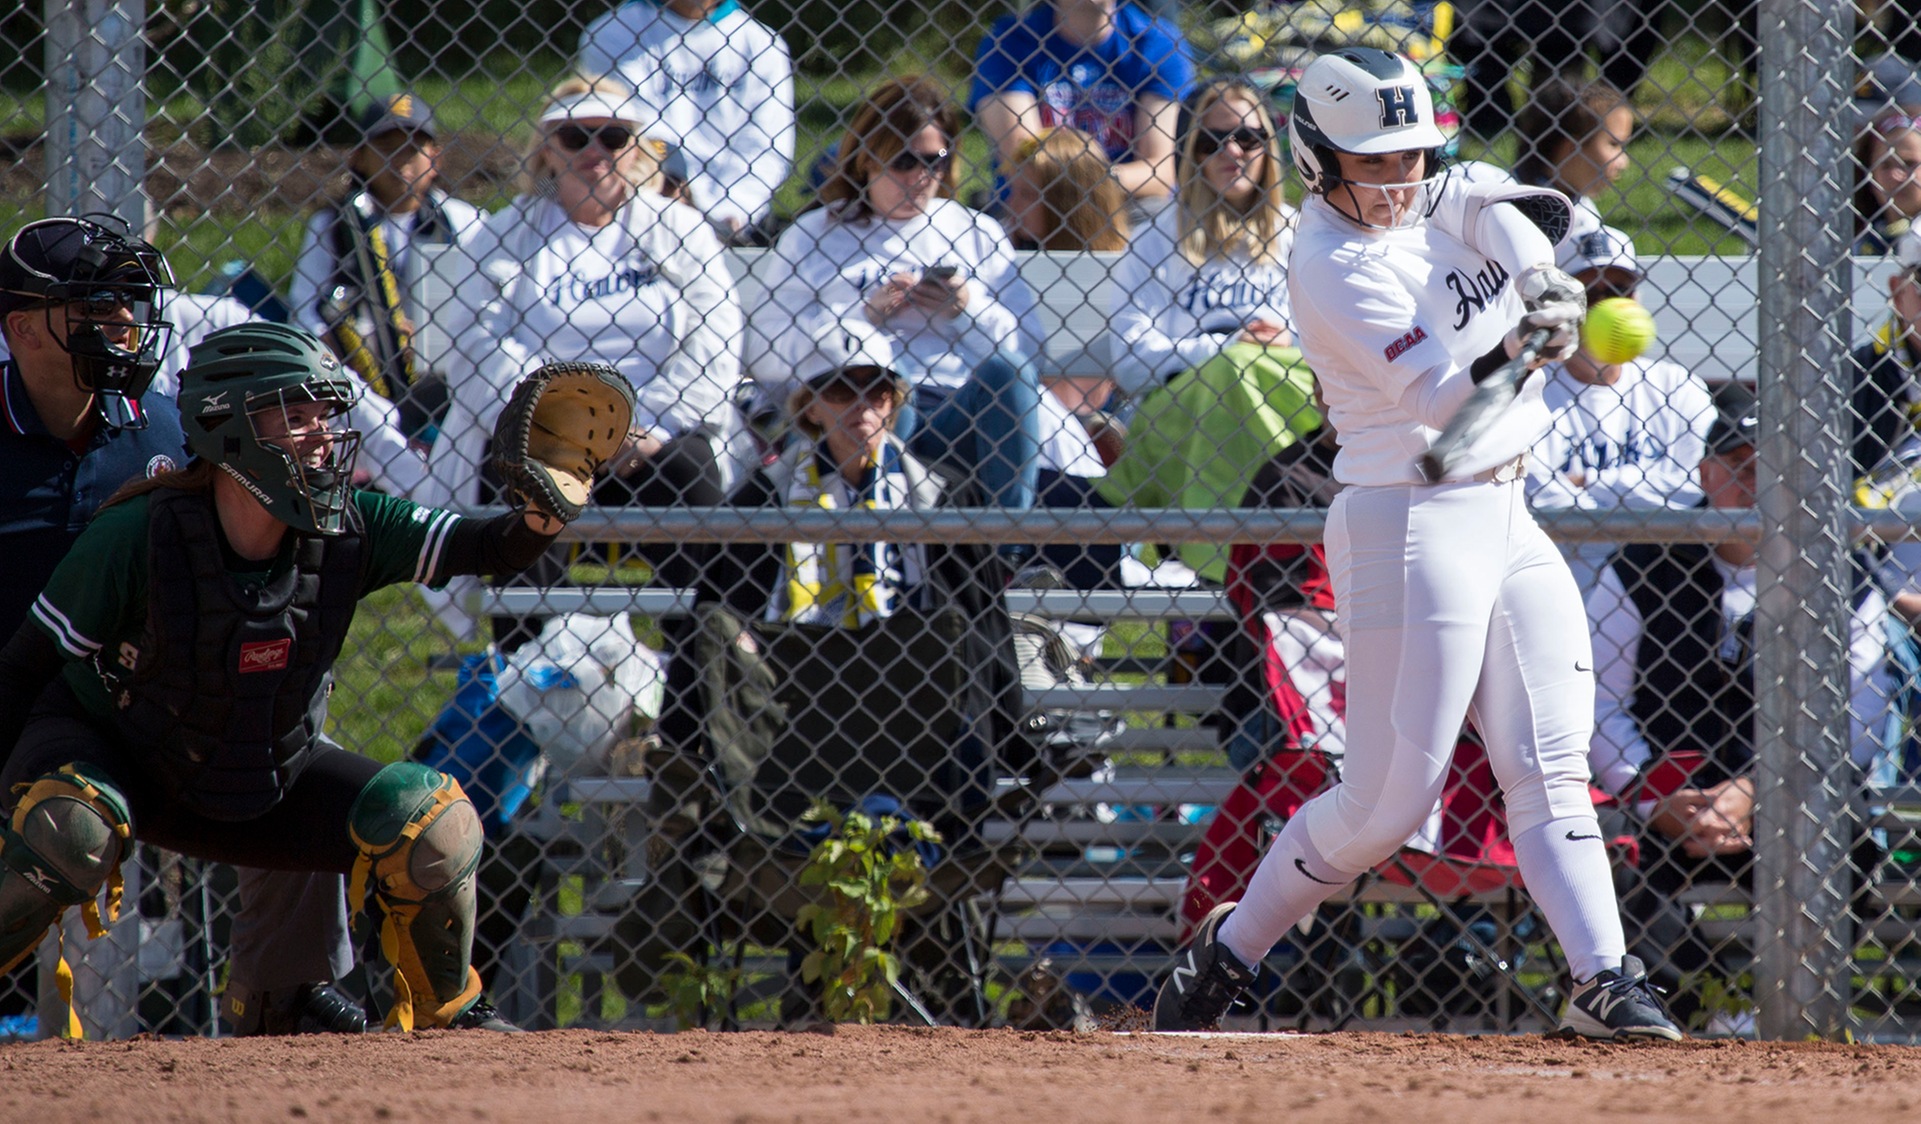 Humber Softball Opens Pre-Season With Five Games Over Three Days